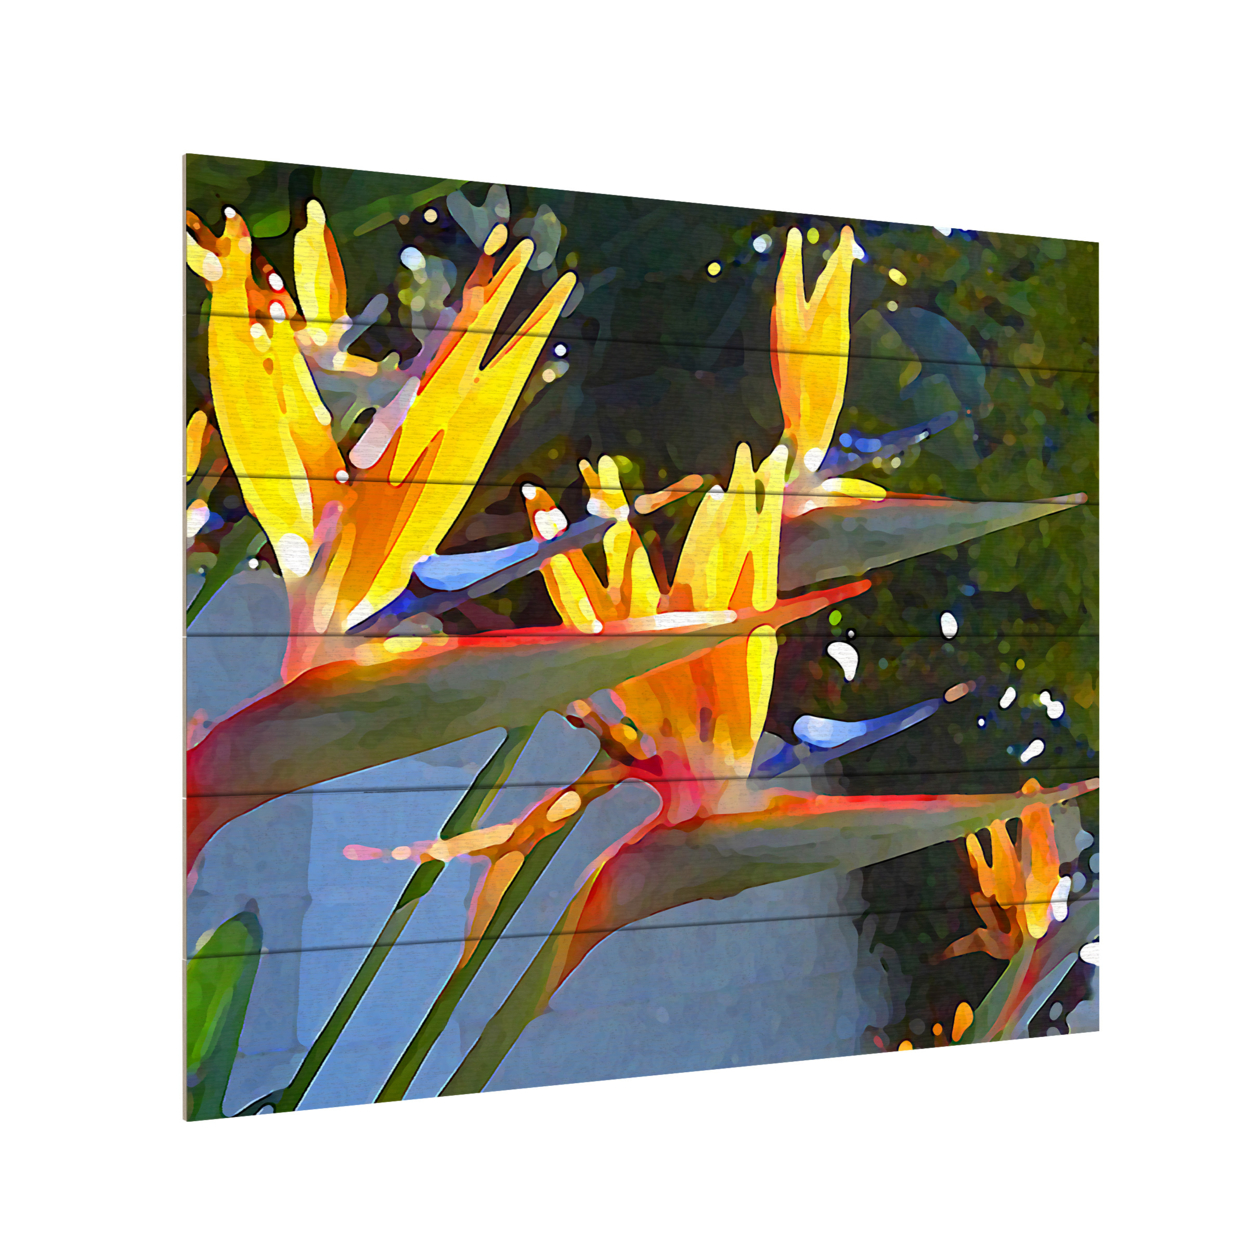 Wooden Slat Art 18 X 22 Inches Titled Bird Of Paradise Backlit By Sun Ready To Hang Home Decor Picture